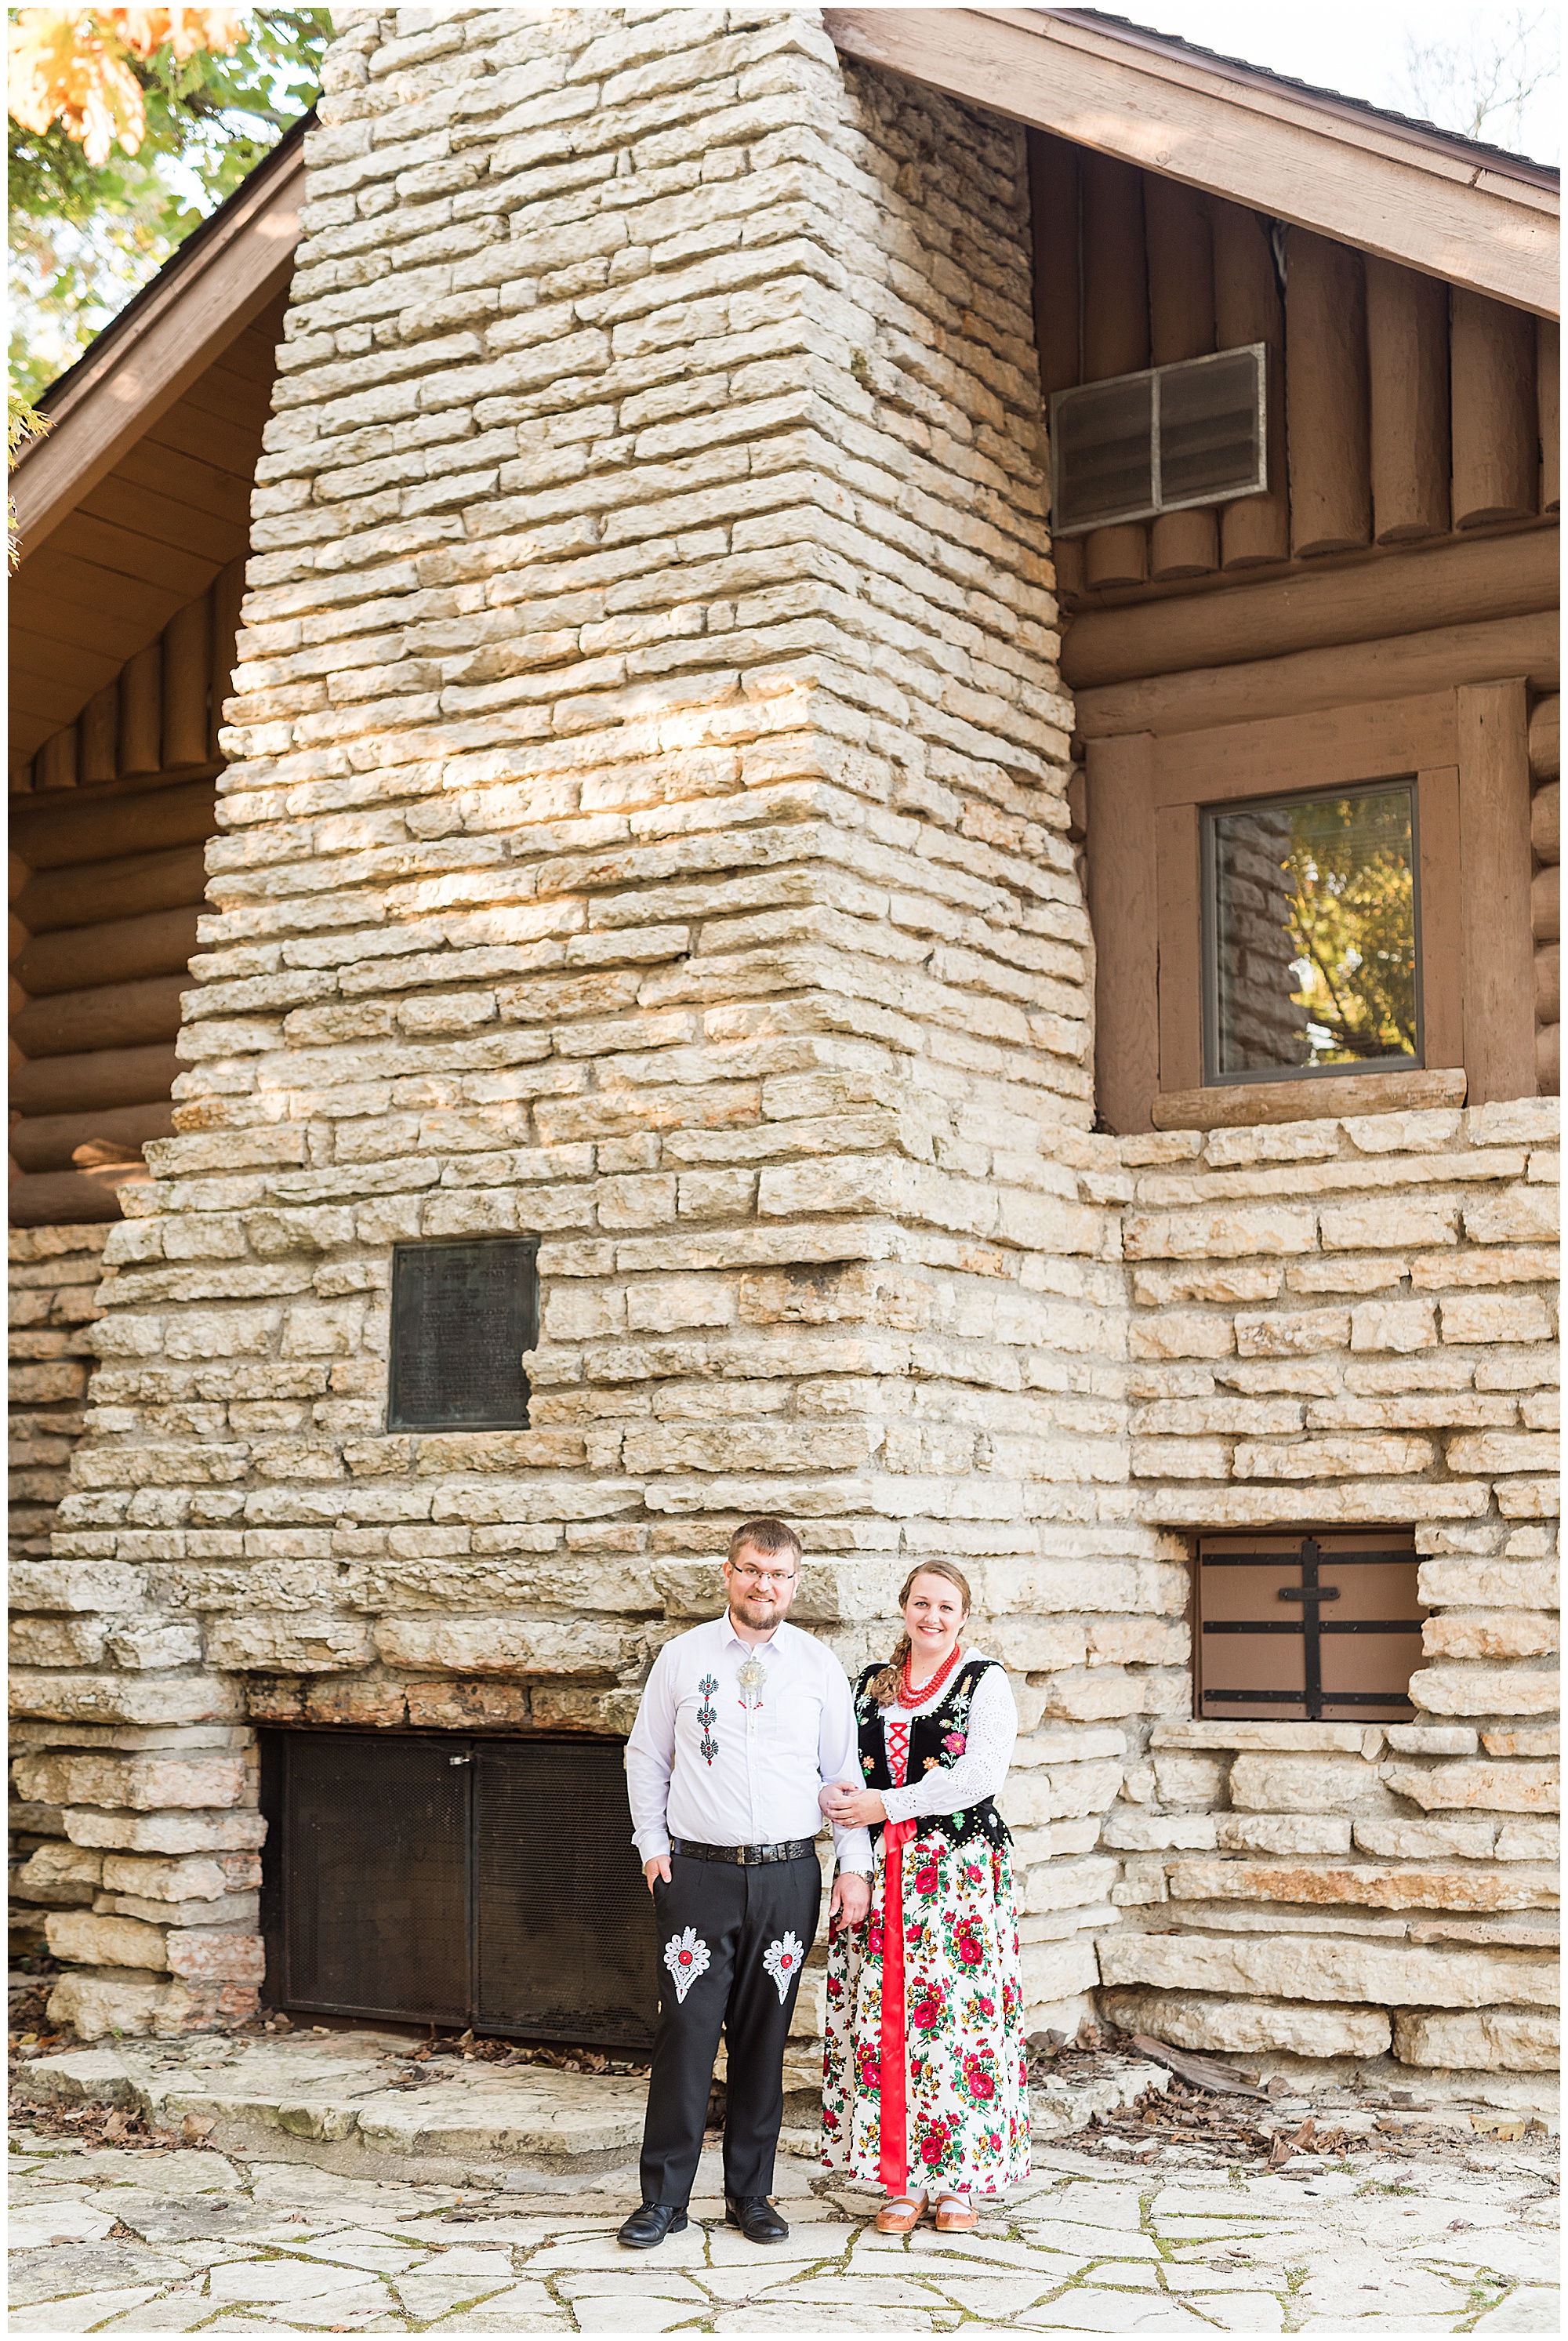 Traditional Polish outfits for Engagement Session at Fullersburg Woods